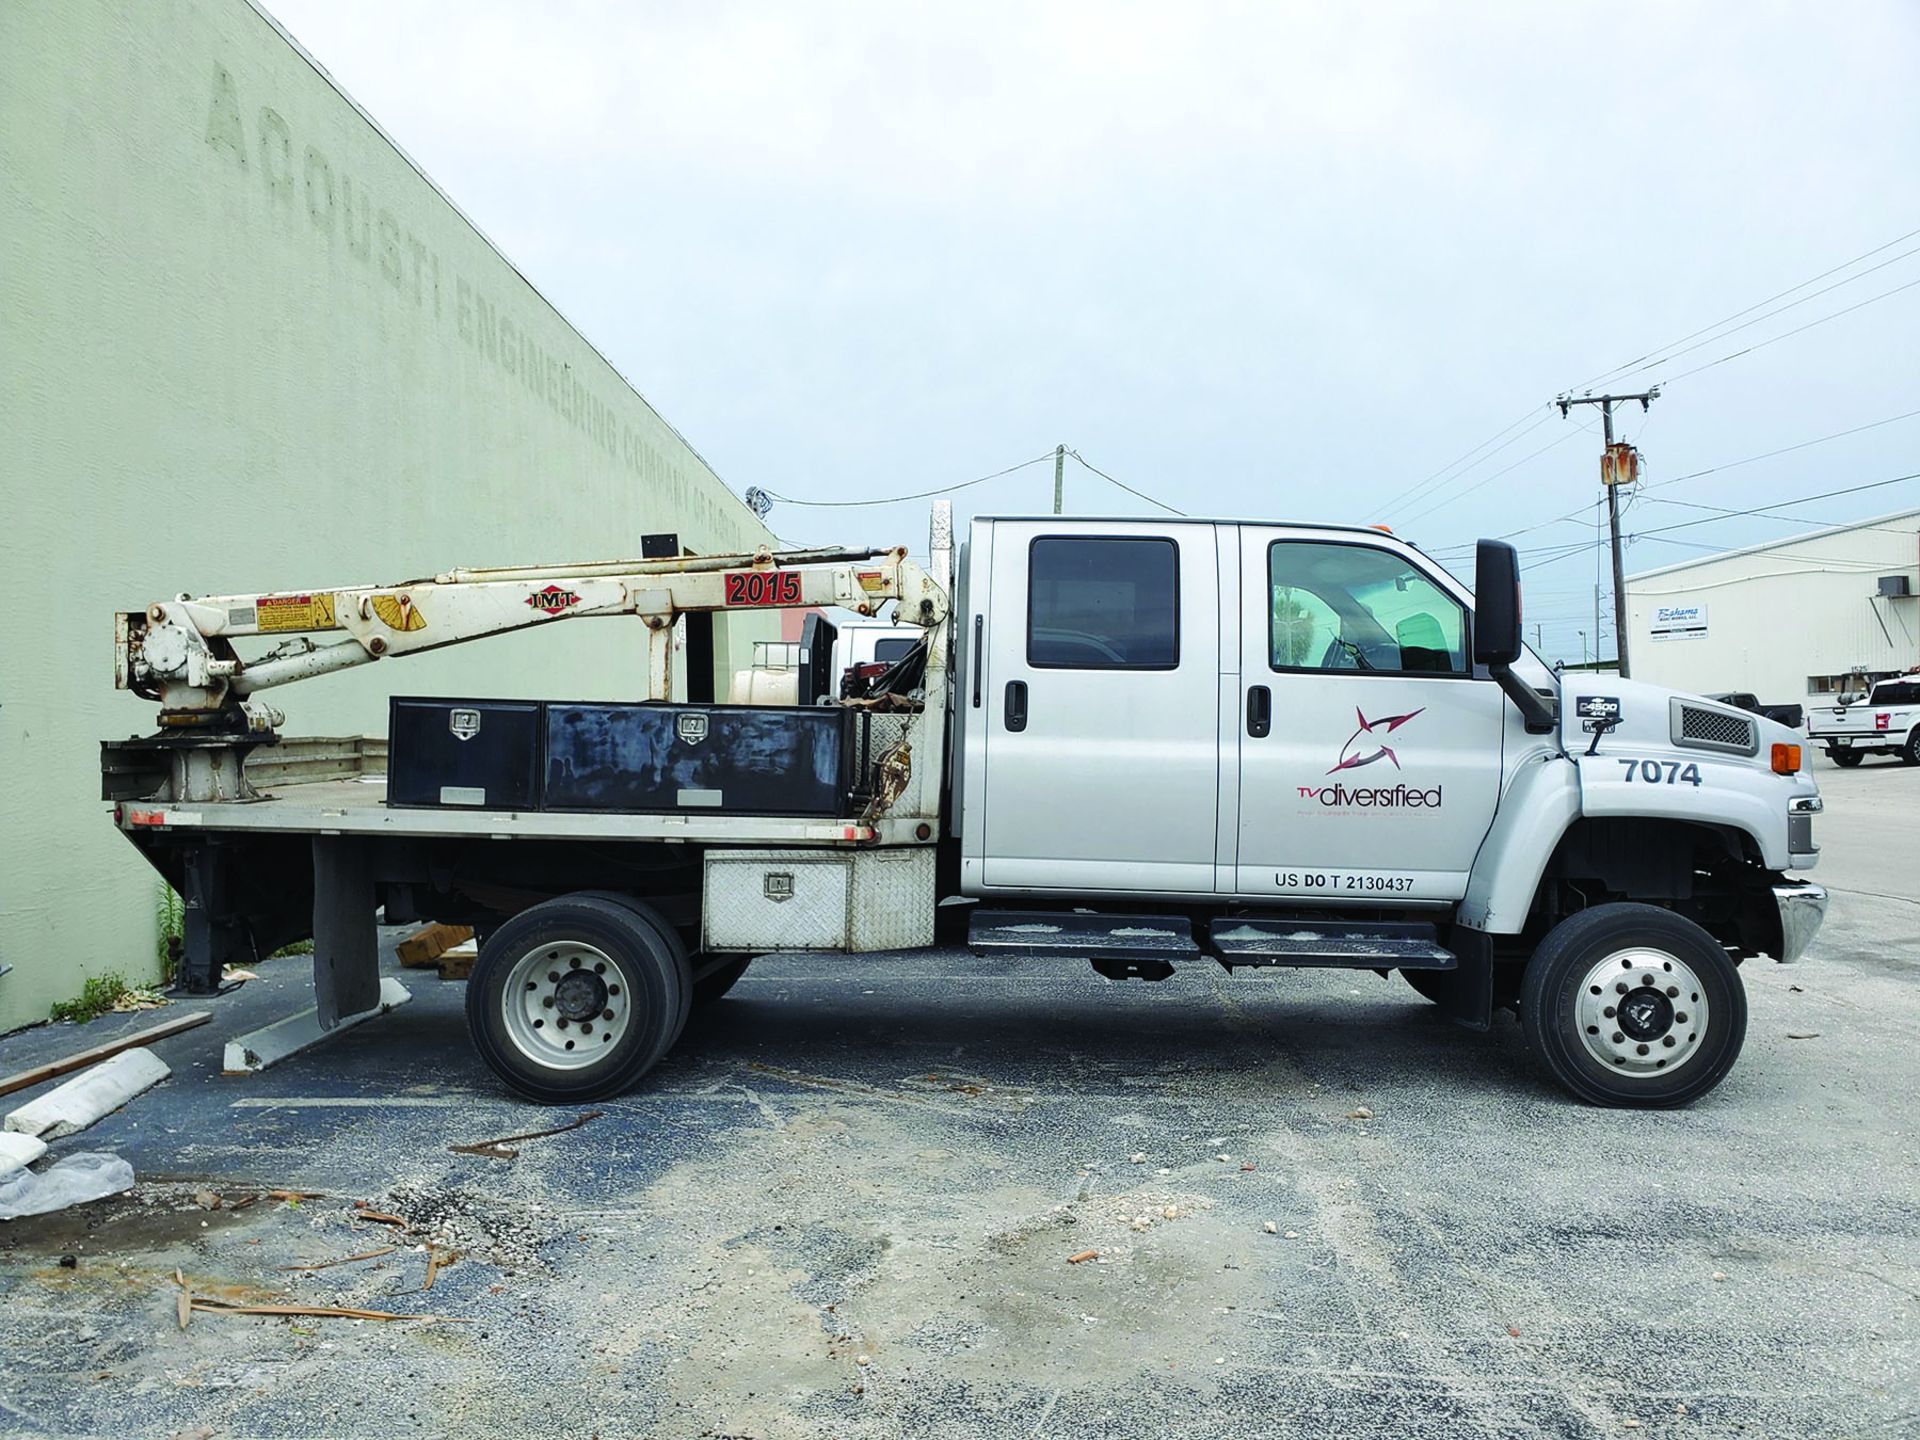 2006 CHEVROLET C4500 4X4 CREW CAB FLAT/STAKE BED TRUCK W/IMT 2015 TELESCOPING BOOM, 2.5 TON HOOK, - Image 5 of 19